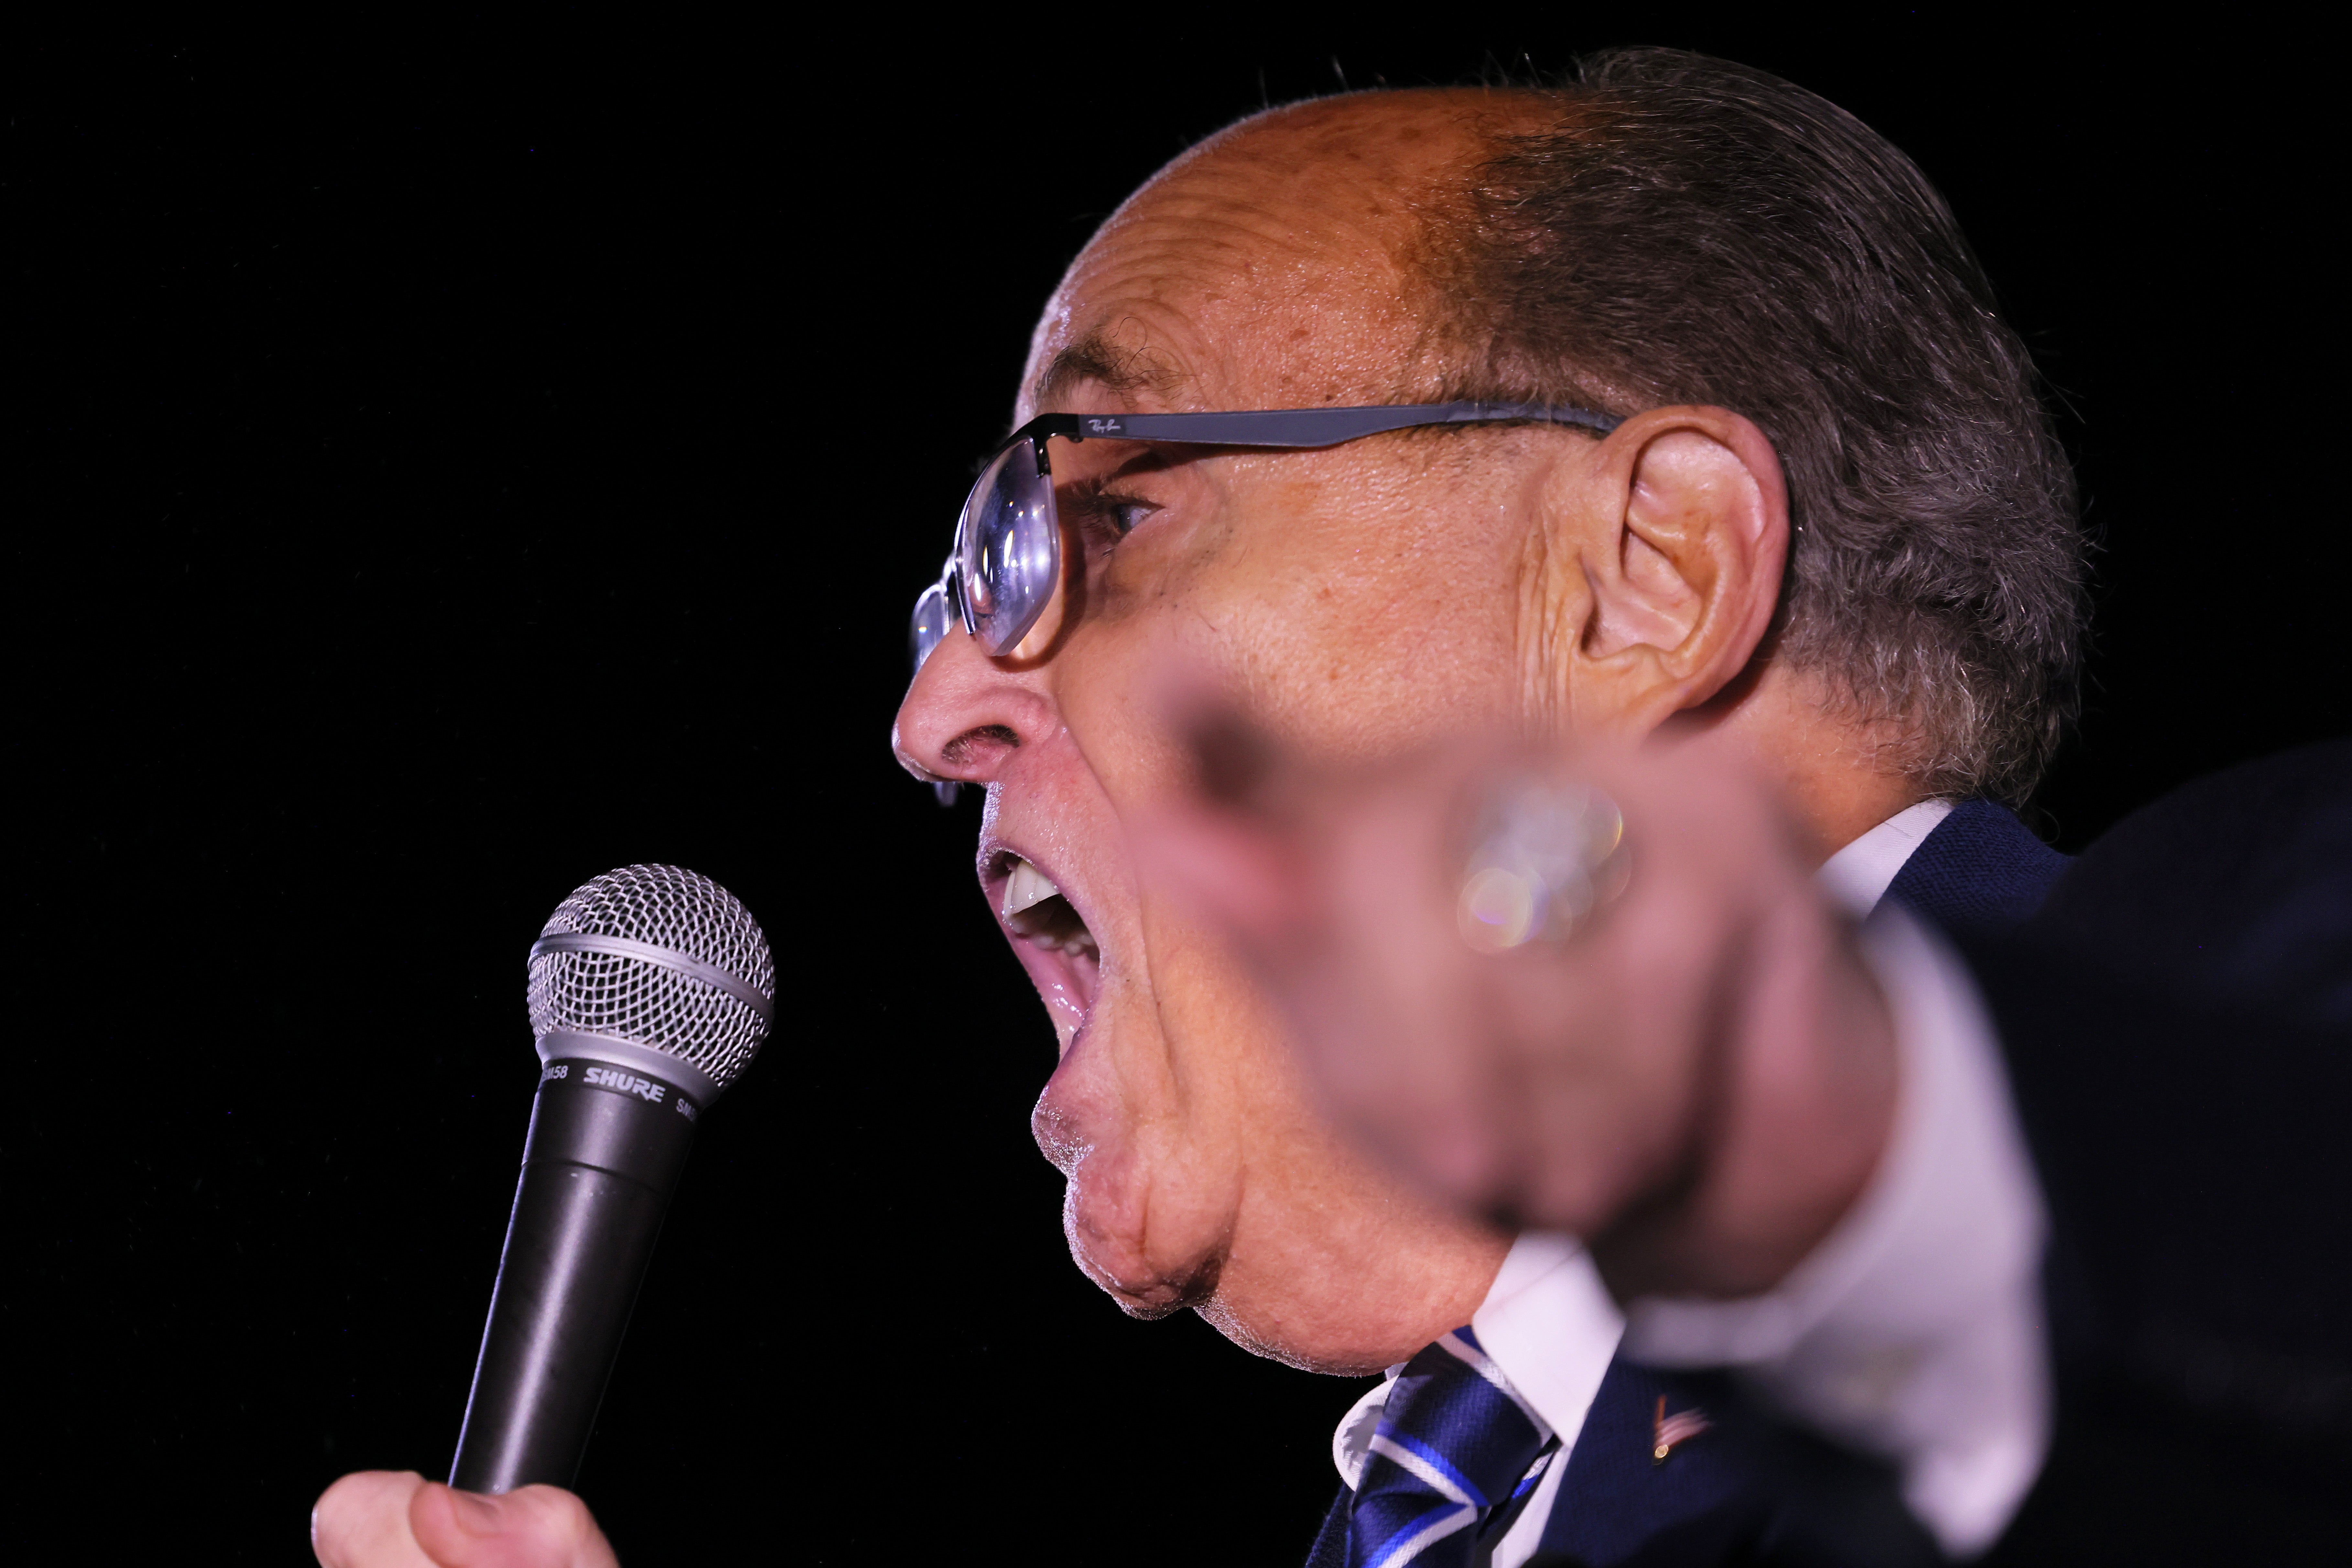 Attorney Rudy Giuliani was one of Trump's top election denial spokespeople. (Photo: Michael M. Santiago, Getty Images)